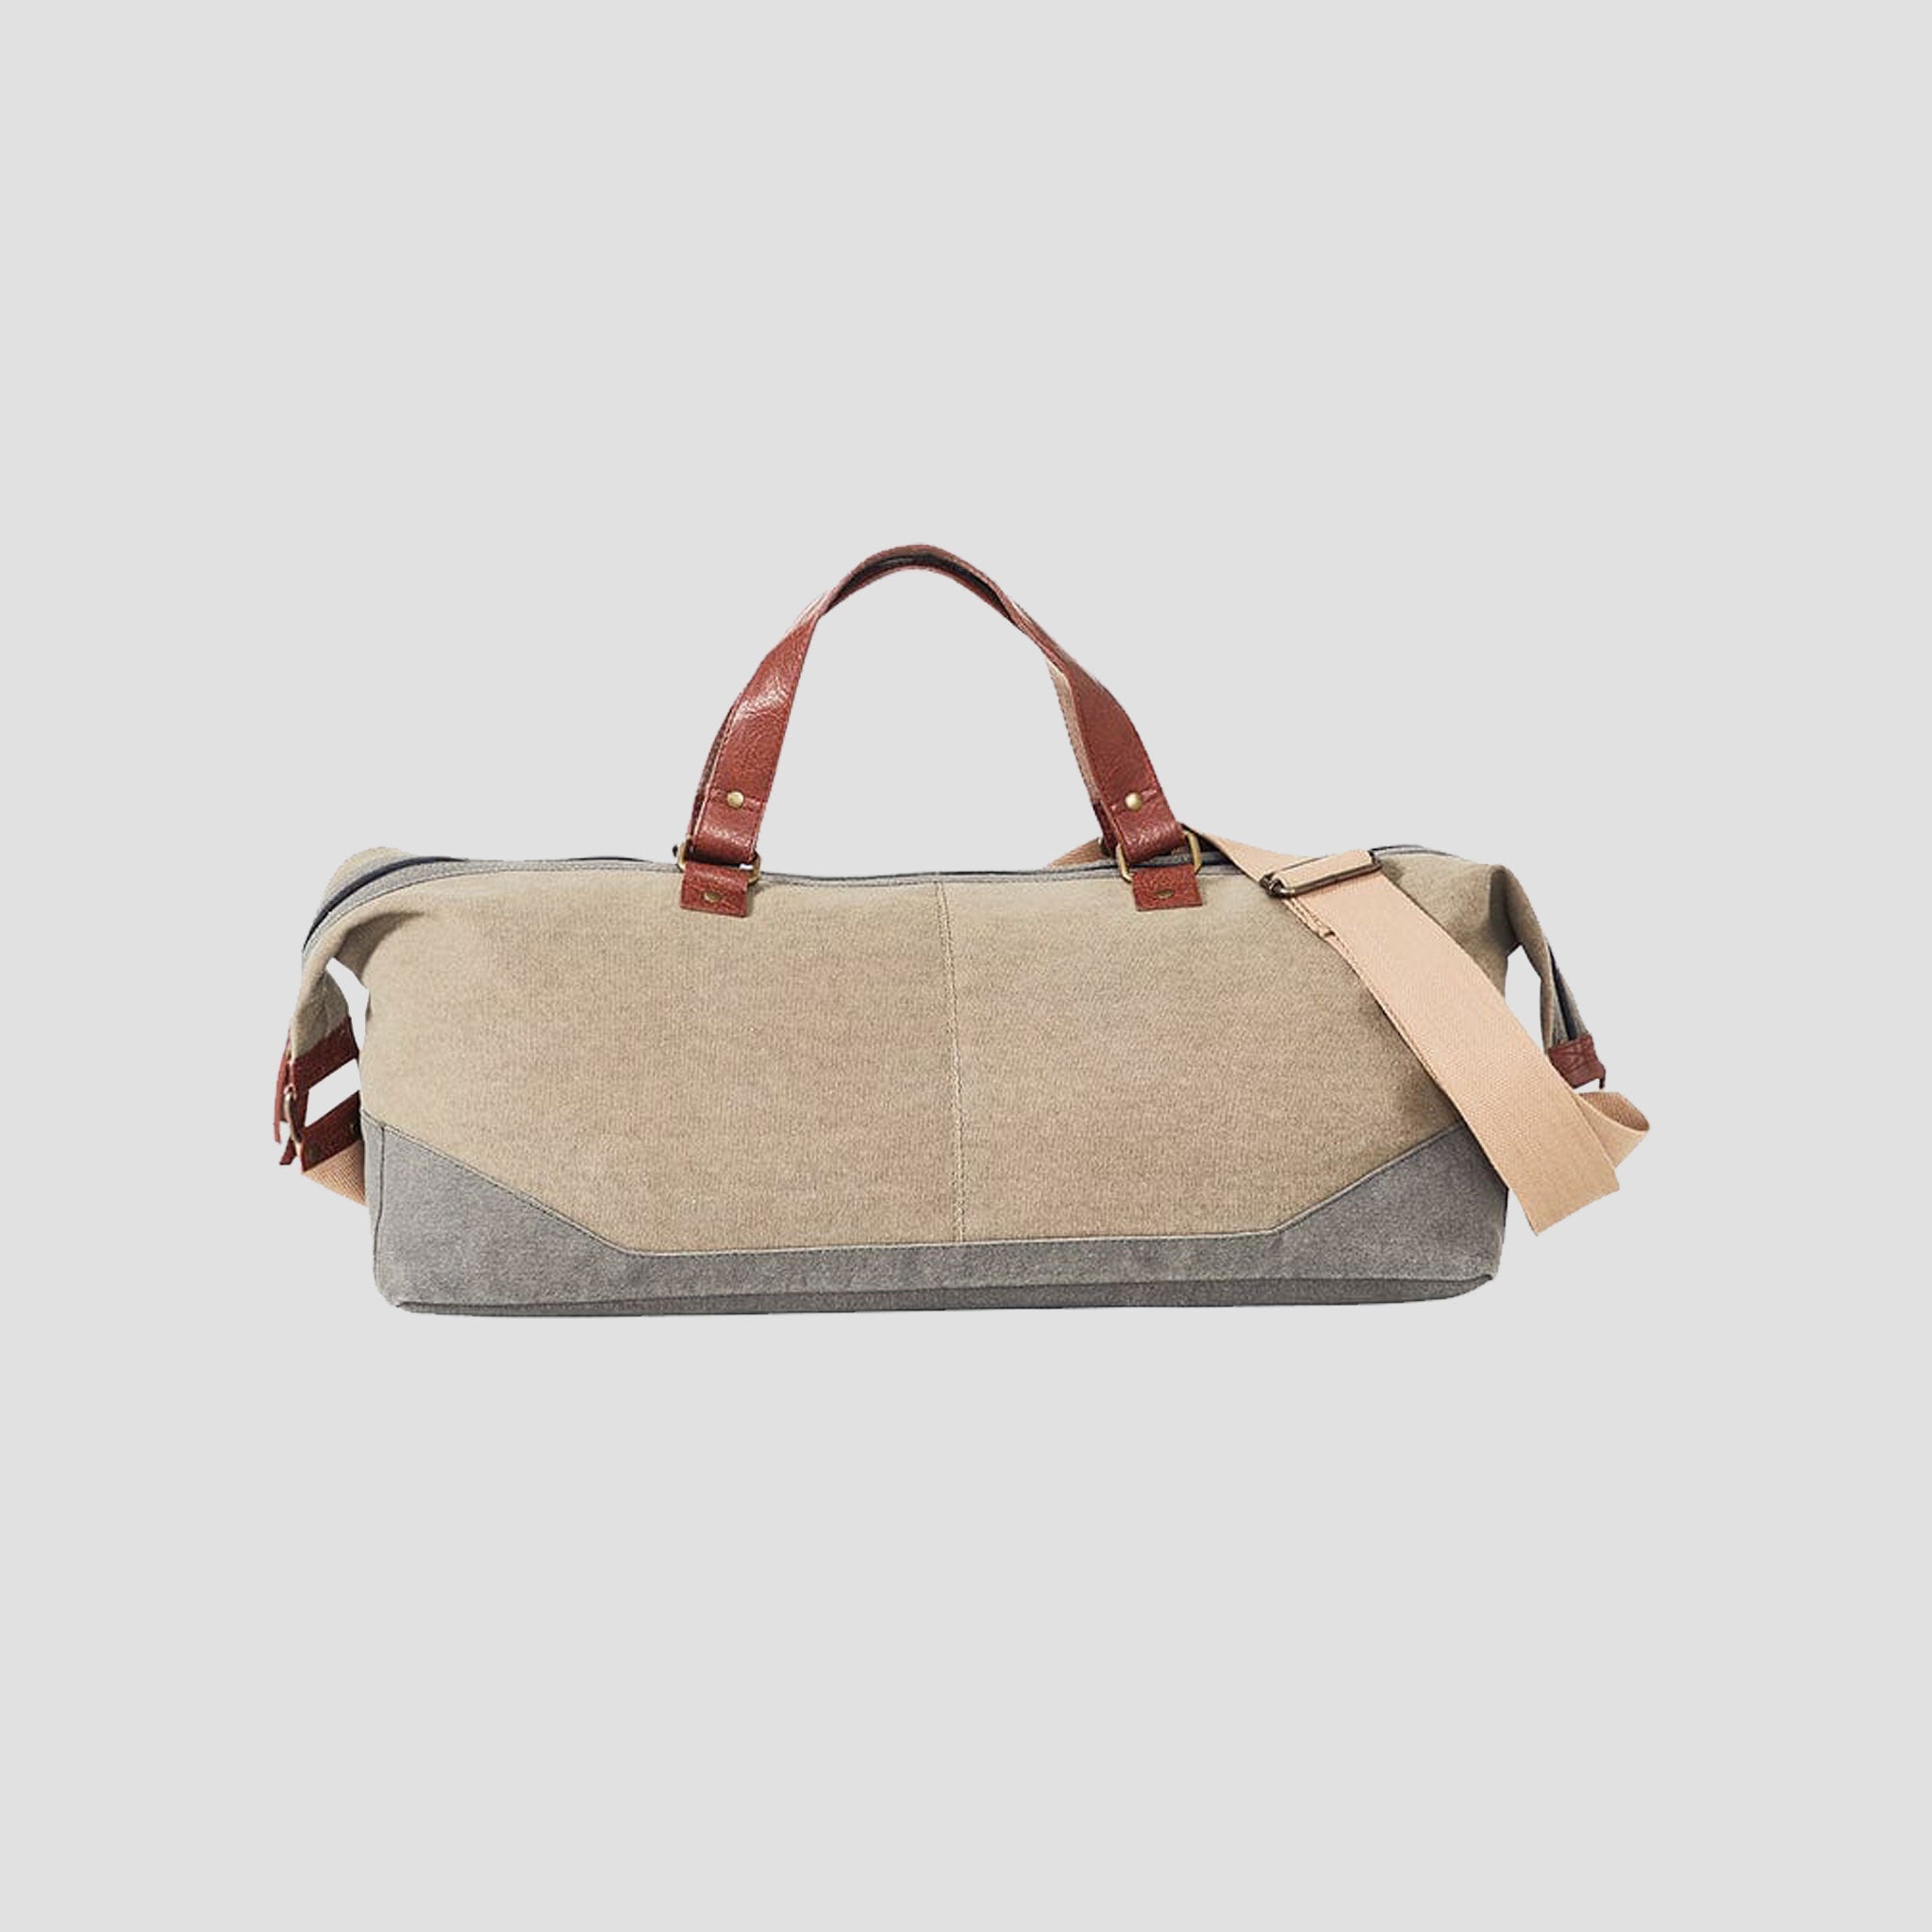 Mona B Canvas Large Duffel Gym Travel and Sports Bag with Stylish Design for Men and Women - MC-236 C - Duffel by Mona-B - Backpack, Flash Sale, Sale, Shop2999, Shop3999